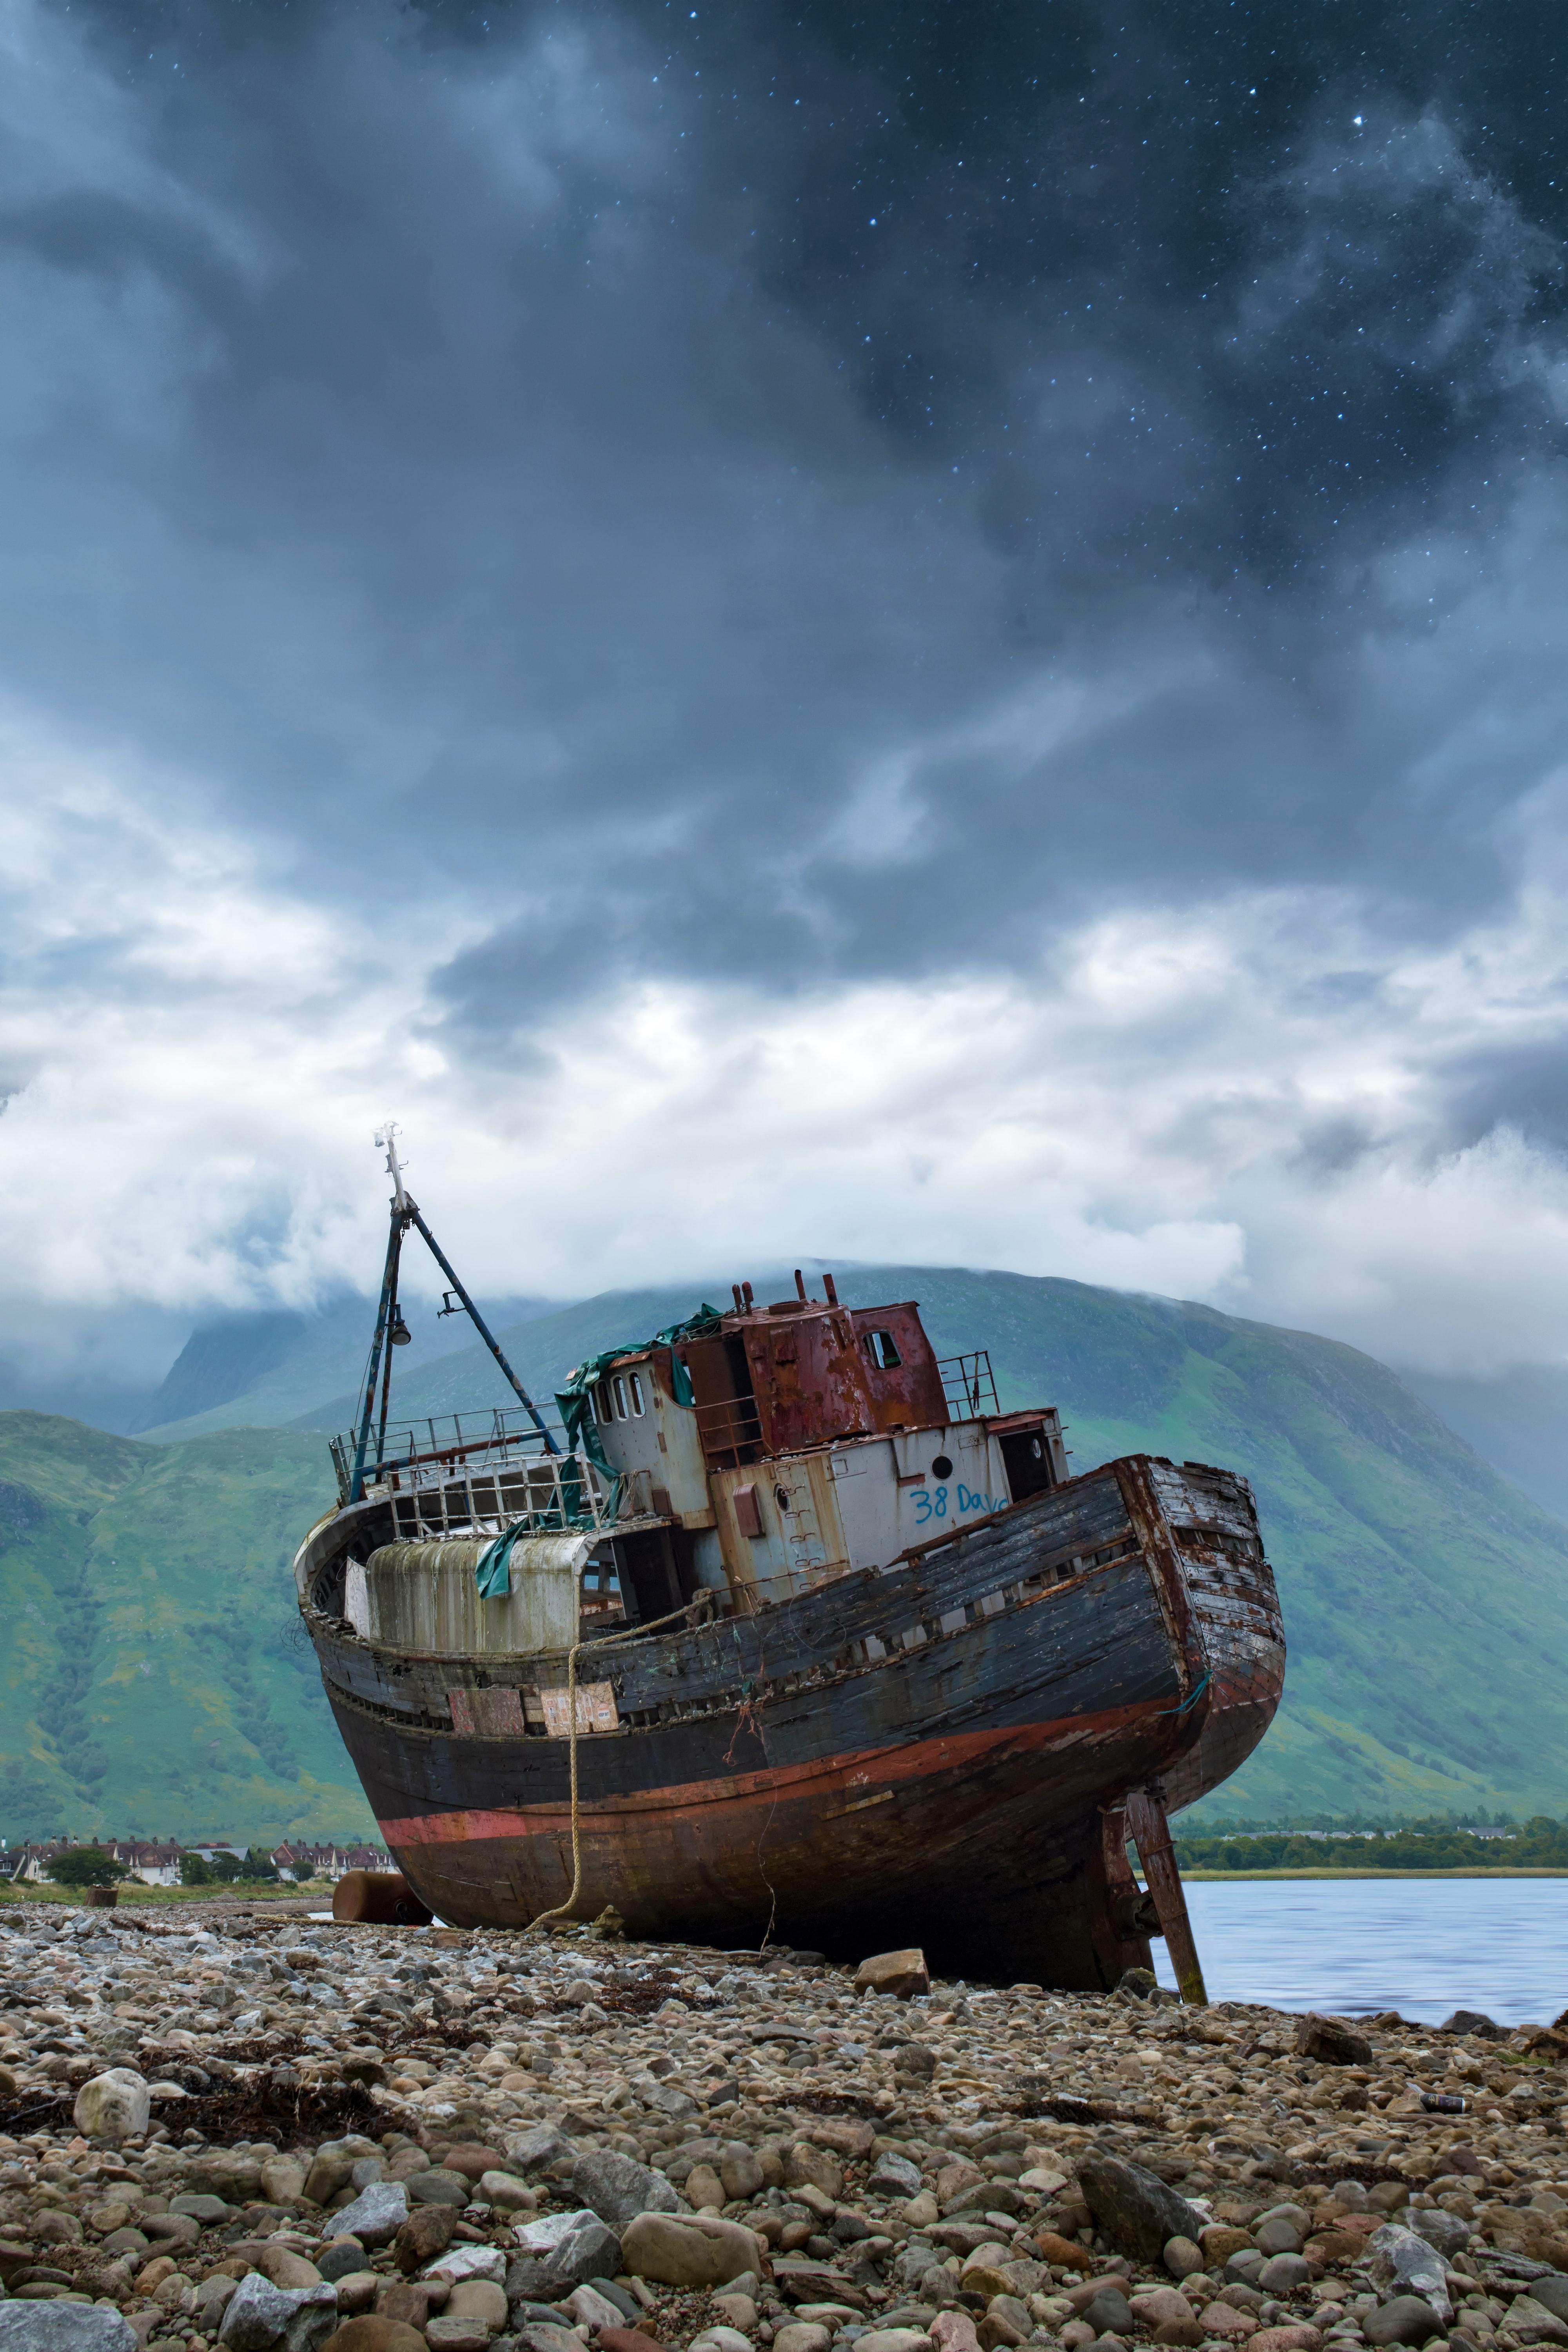 The Old Boat at Corpach